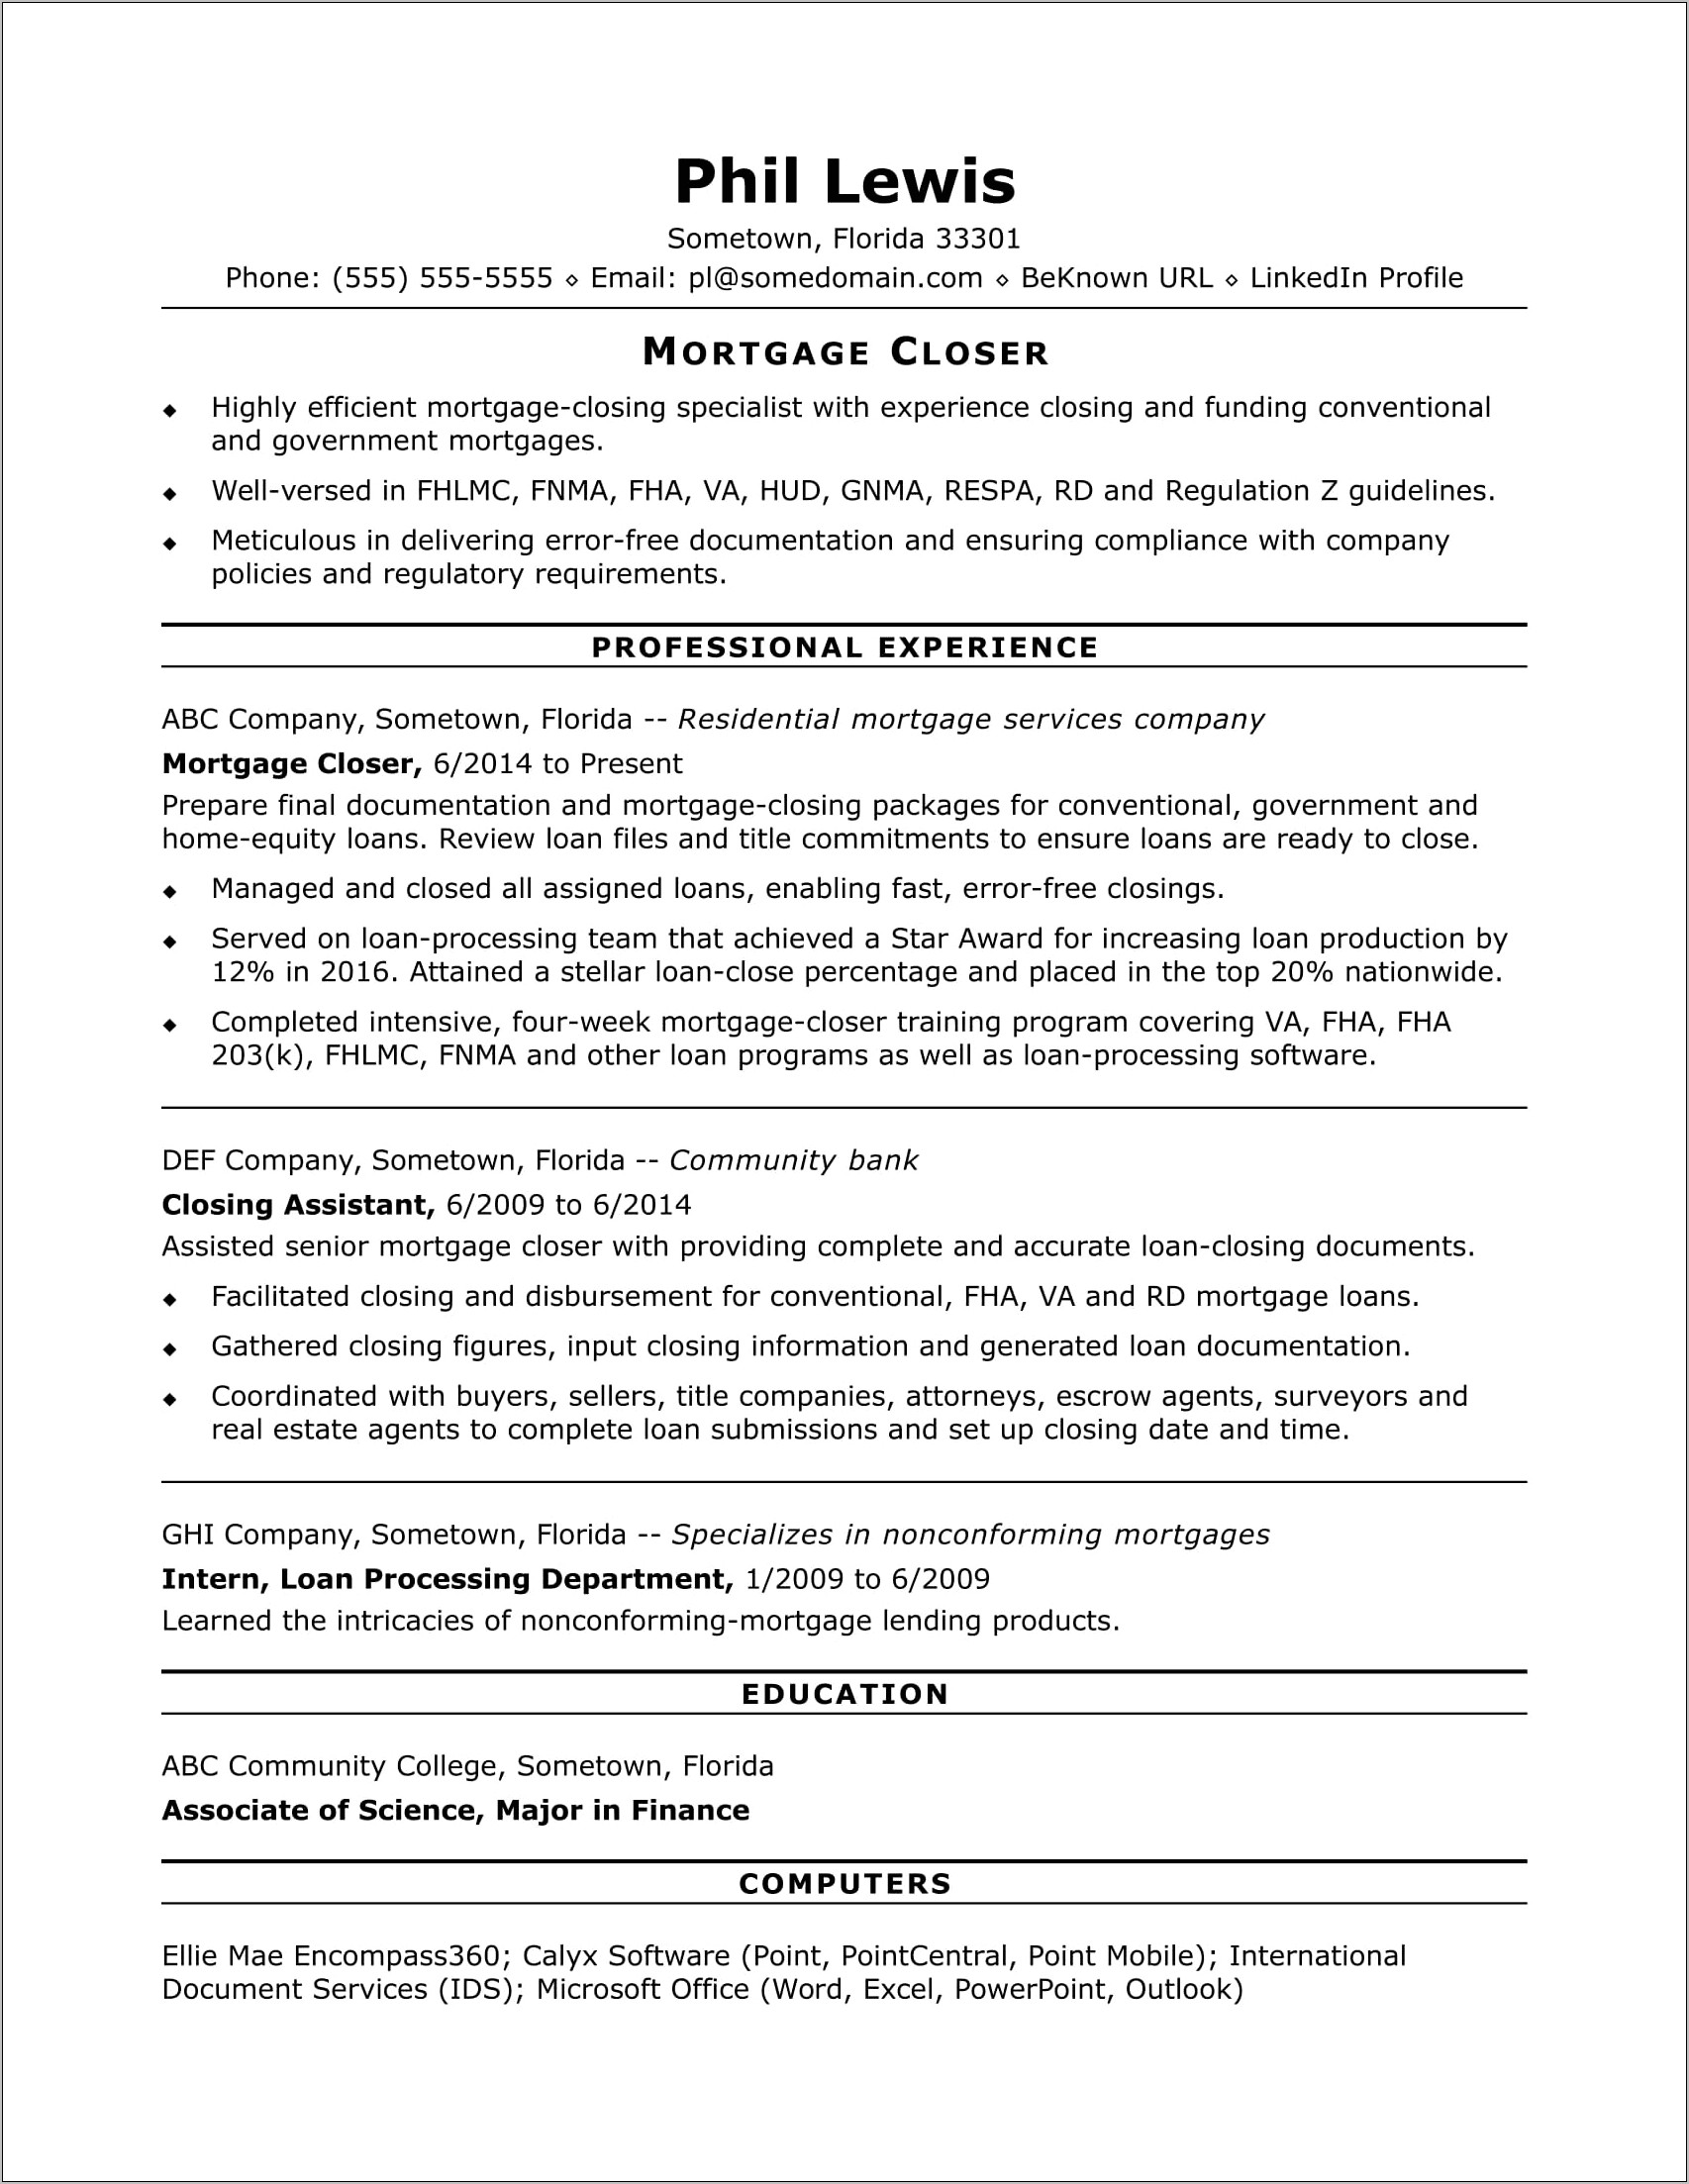 Resume Objective Examples For Mortgage Processor